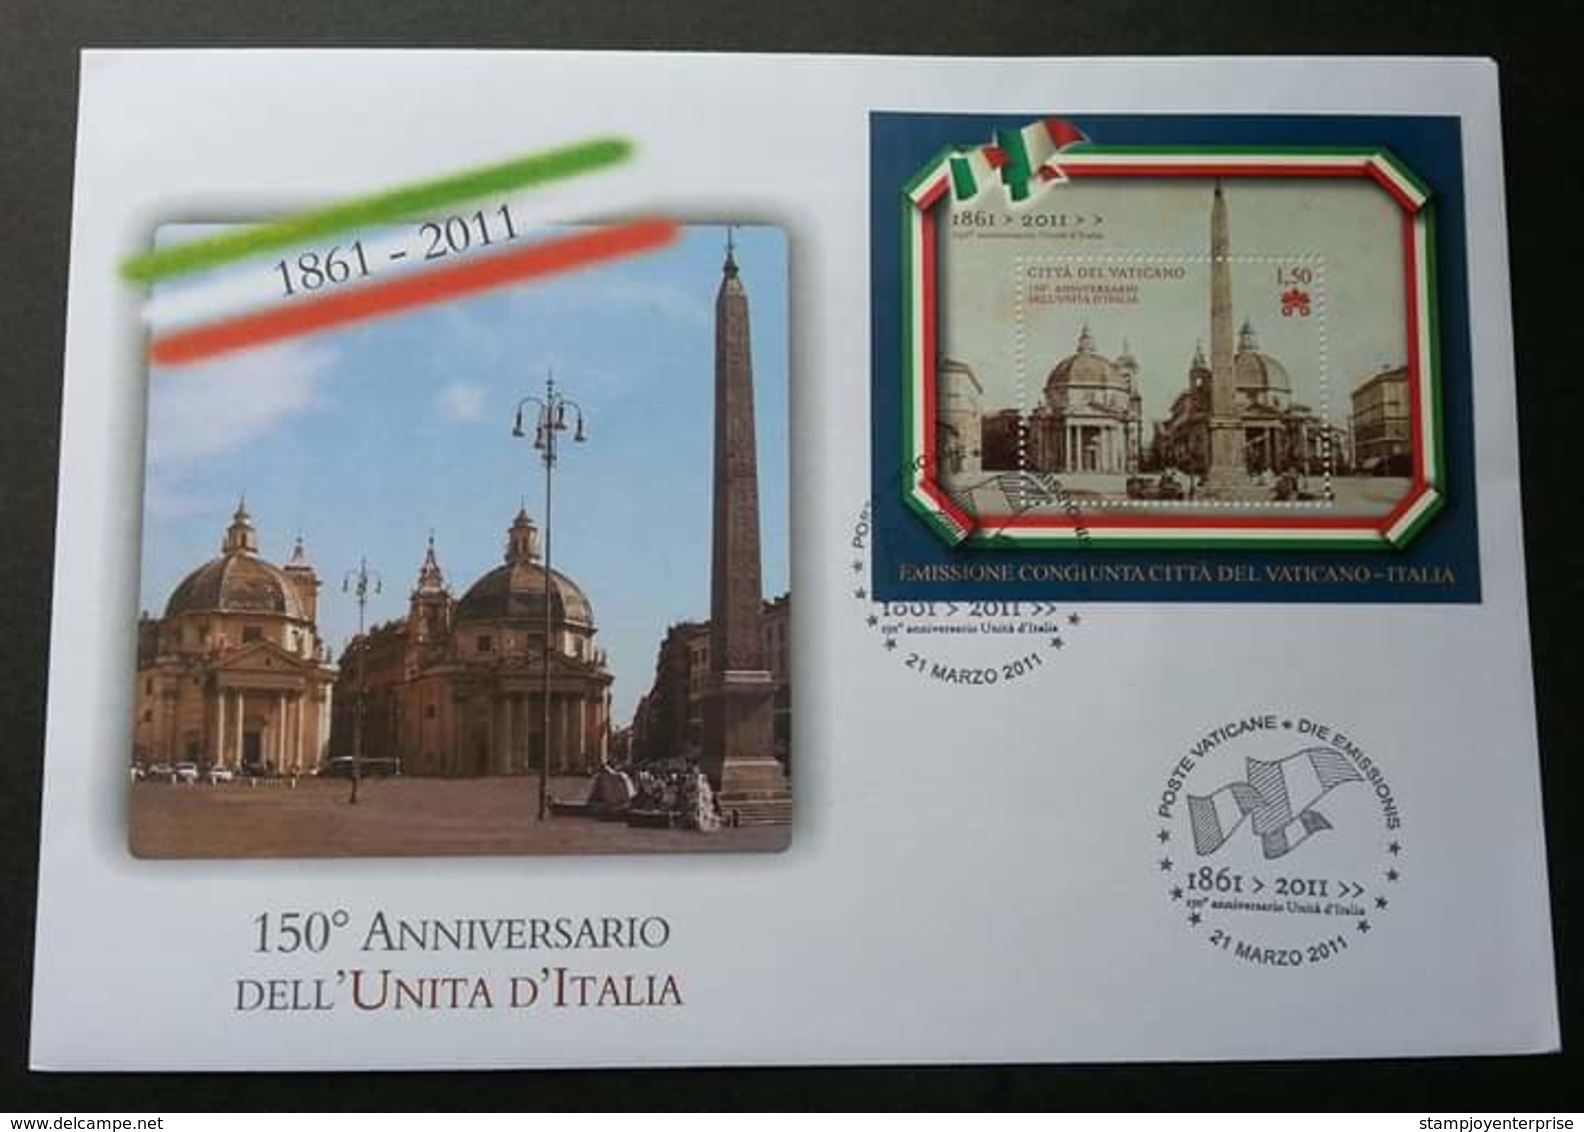 Vatican - Italy Joint Issue 150th Anniversary Of Italy Unity 2011 (miniature FDC) - Briefe U. Dokumente